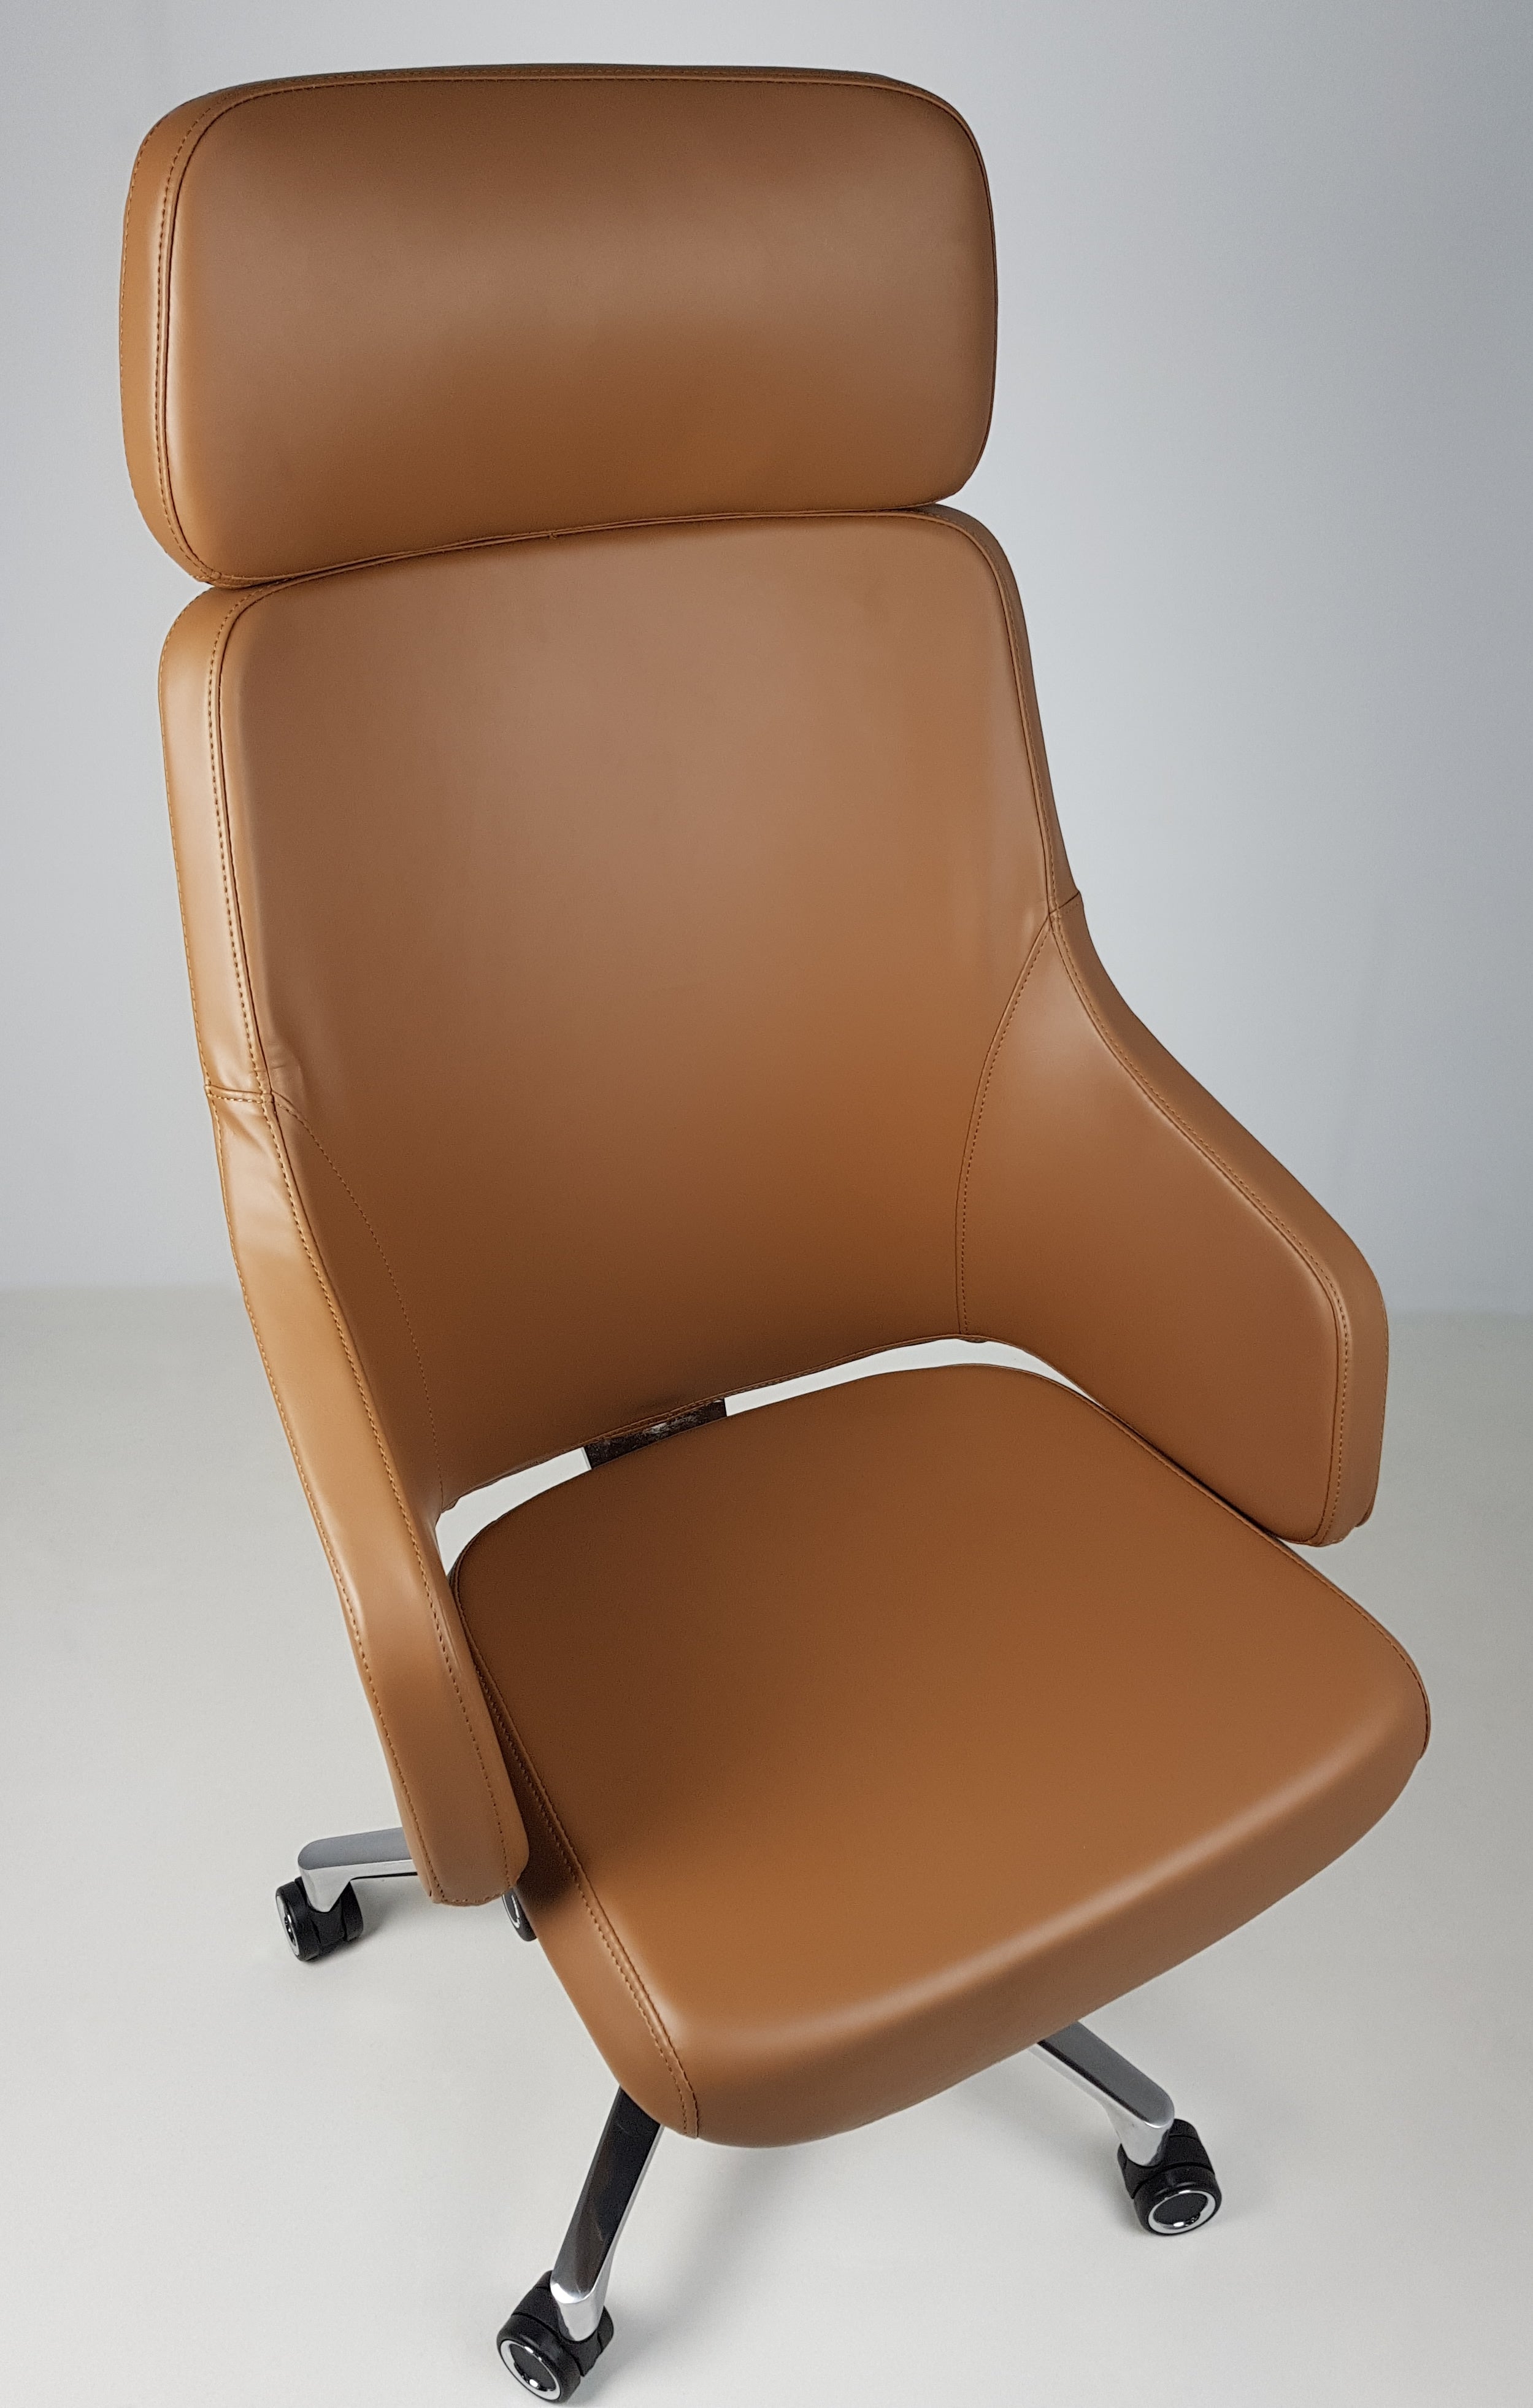 High Back Tan Leather Executive Office Chair with Seat Slide - CHA-1823A